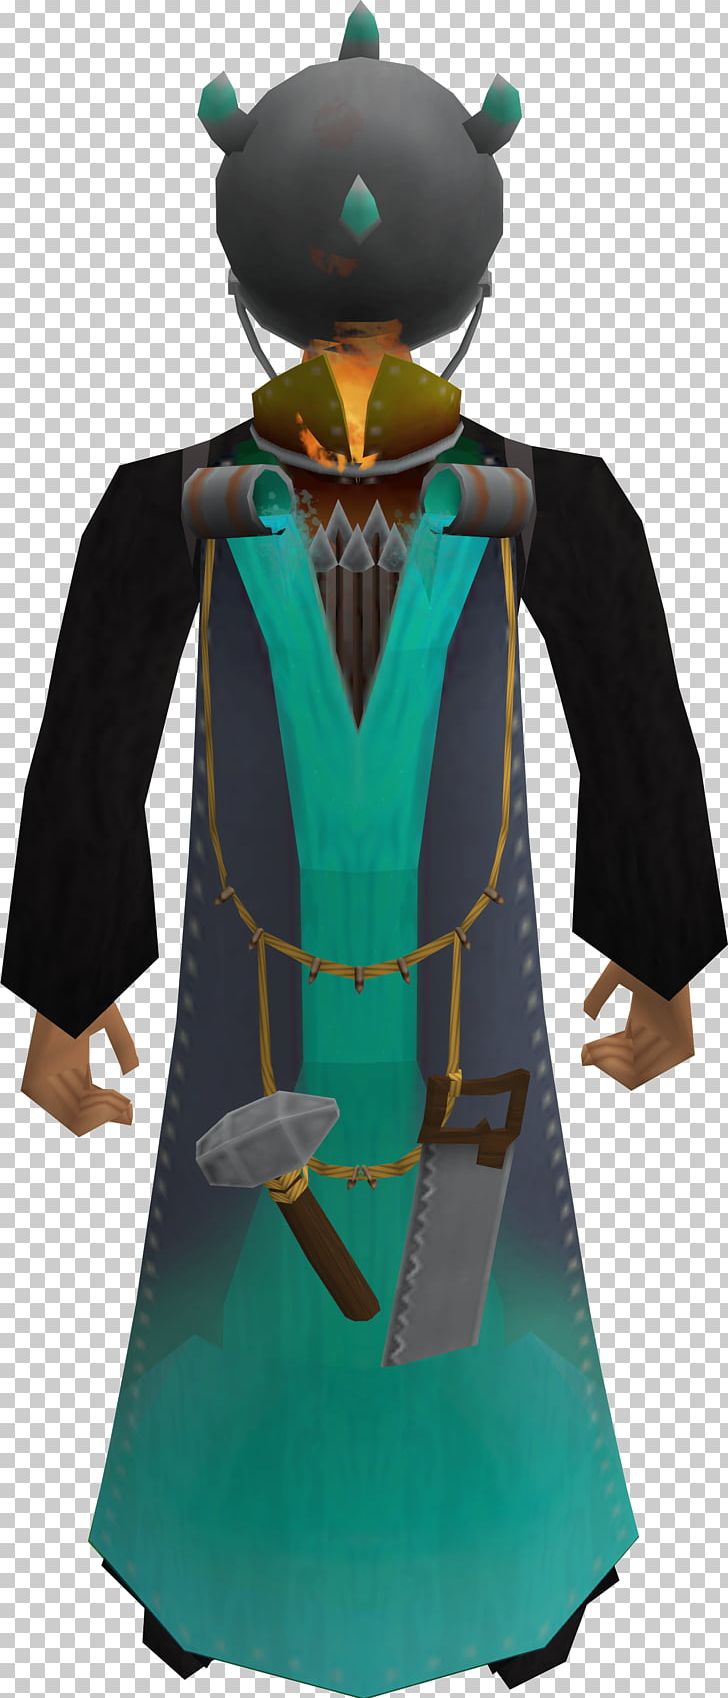 RuneScape Robe Artisan Outerwear PNG, Clipart, Artisan, Cape, Costume, Costume Design, Effigy Free PNG Download